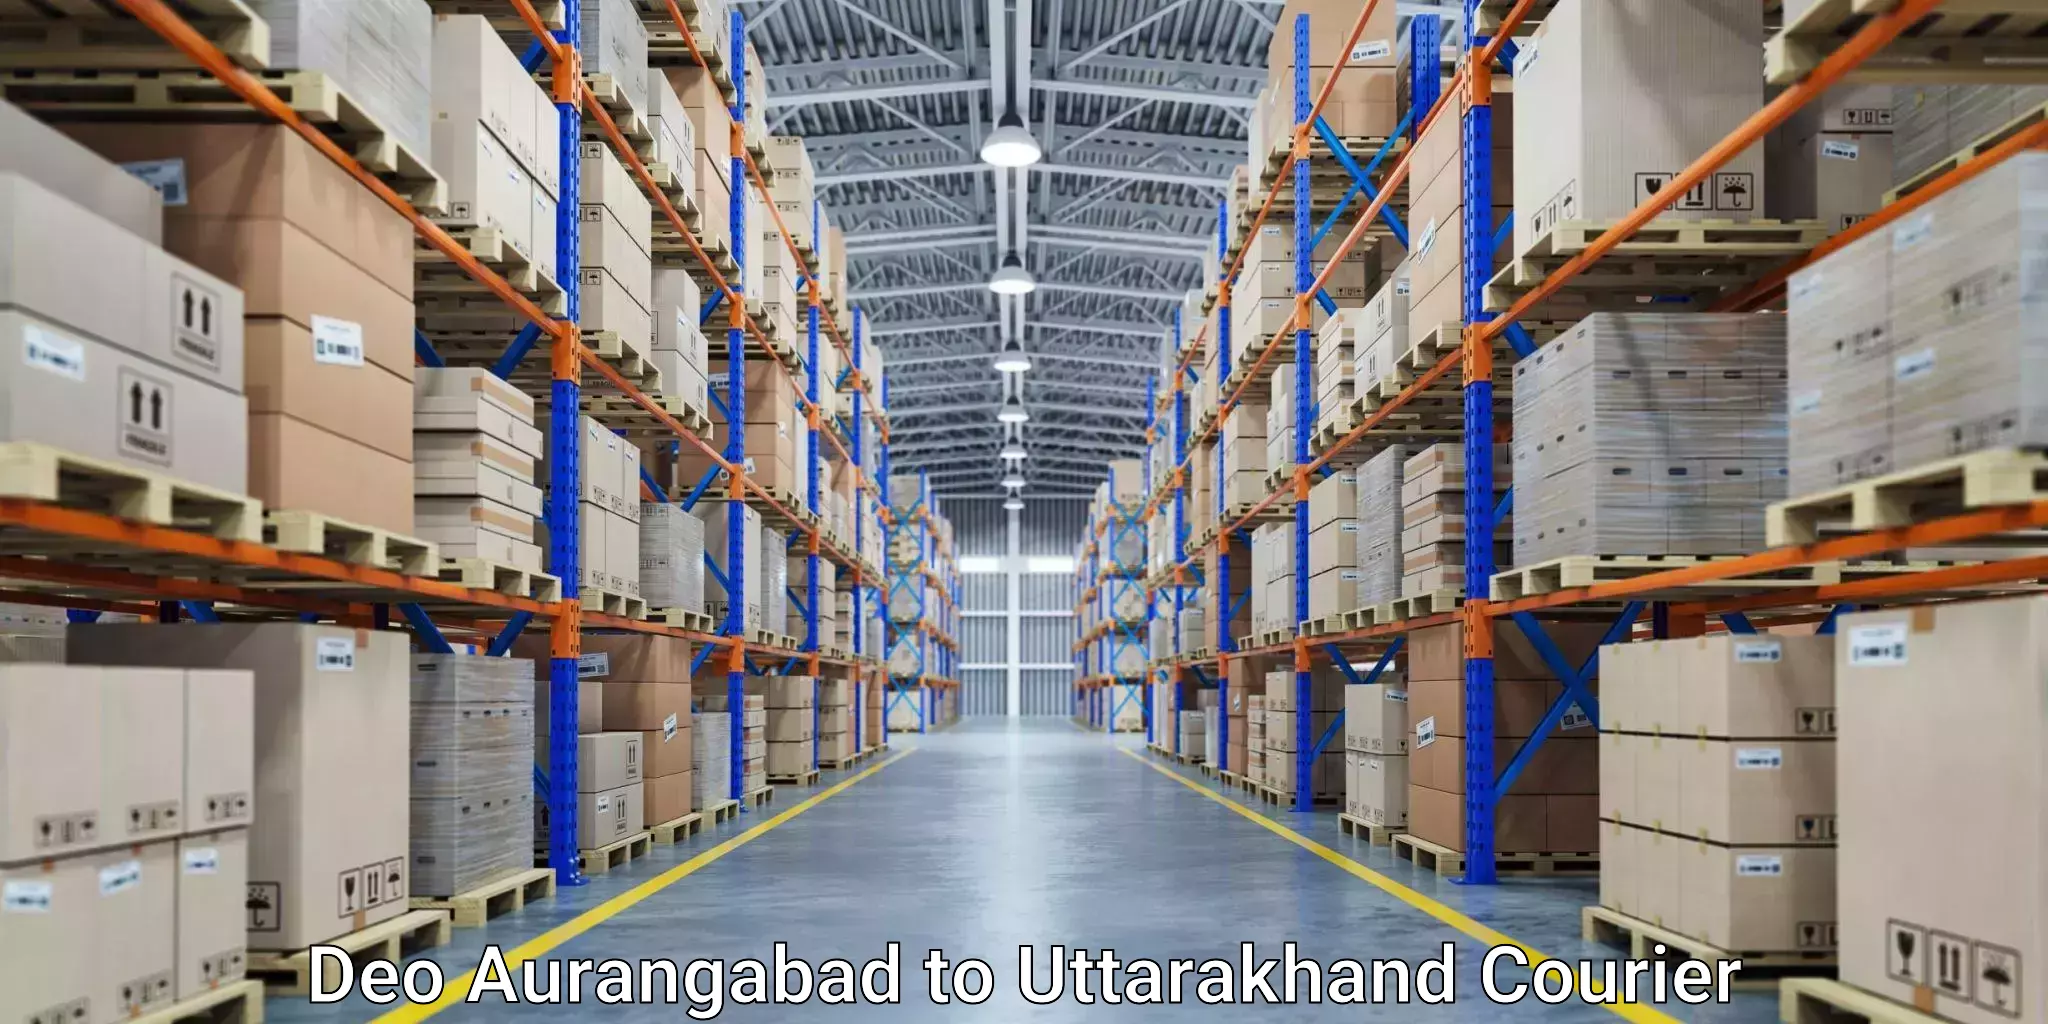 Express package services Deo Aurangabad to Tehri